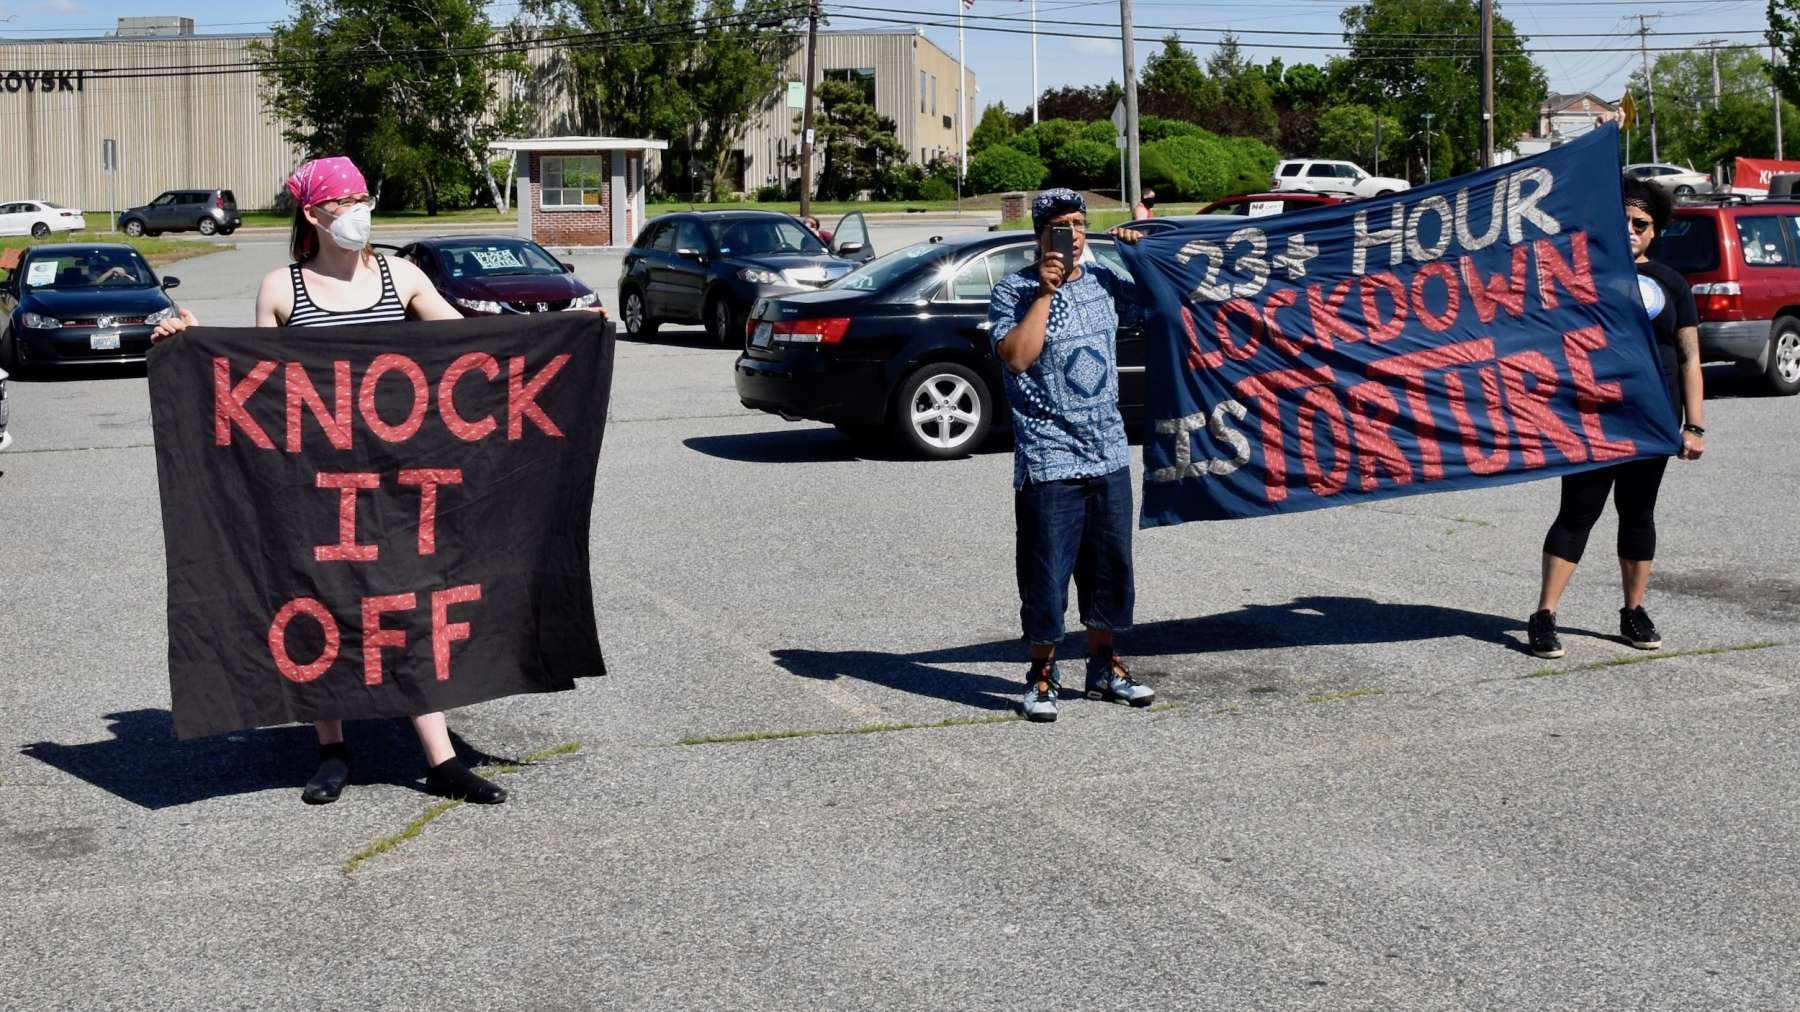 Rhode Island News: A noise demonstration at the ACI seeks reforms for the incarcerated amid COVID-19 crisis